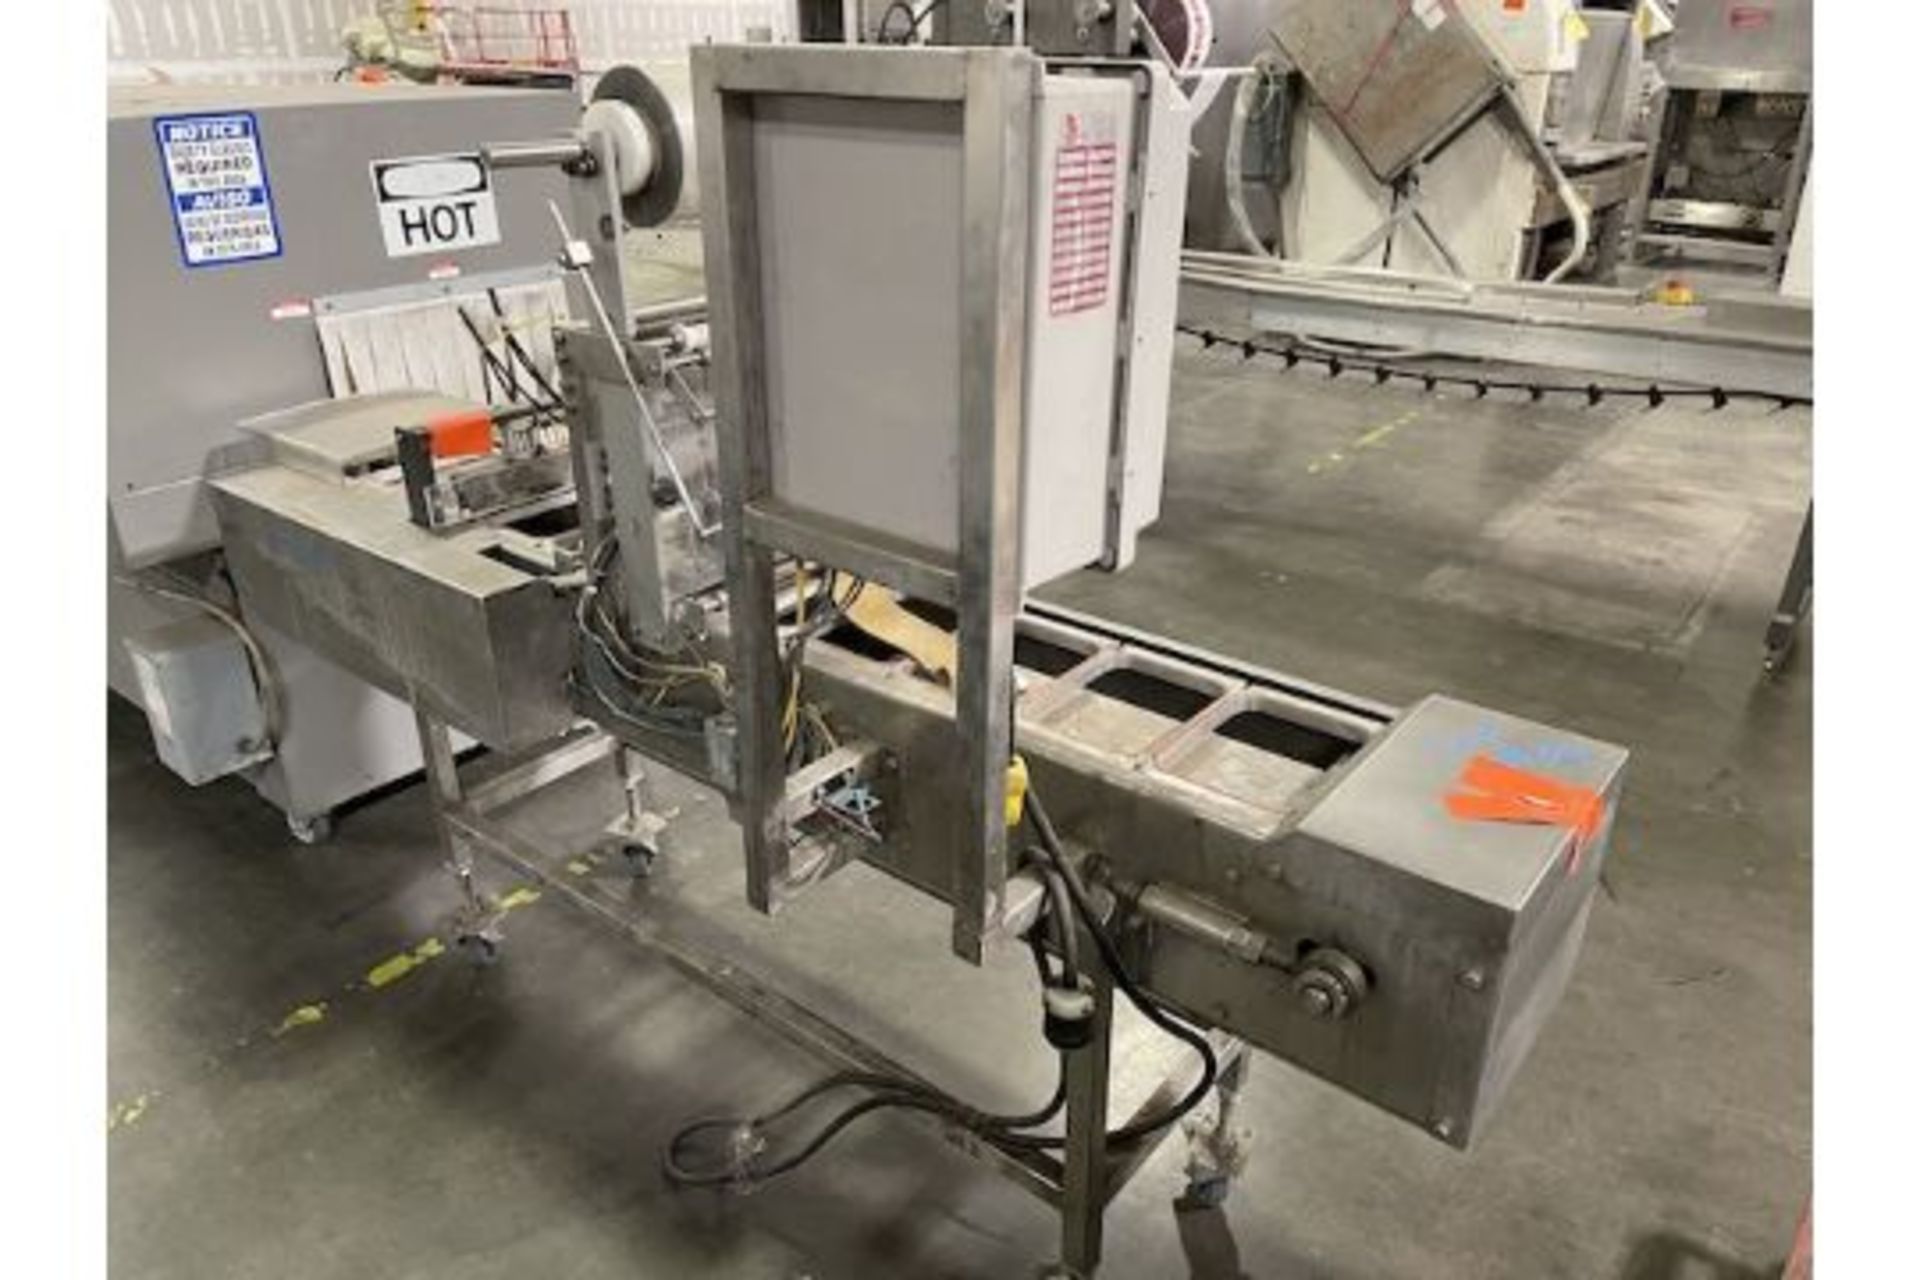 DM Lapointe Tray Sealer, 6.5" x 8.5" Dies, Portable Unit, Rigging/Loading Fee $50 - Image 3 of 5